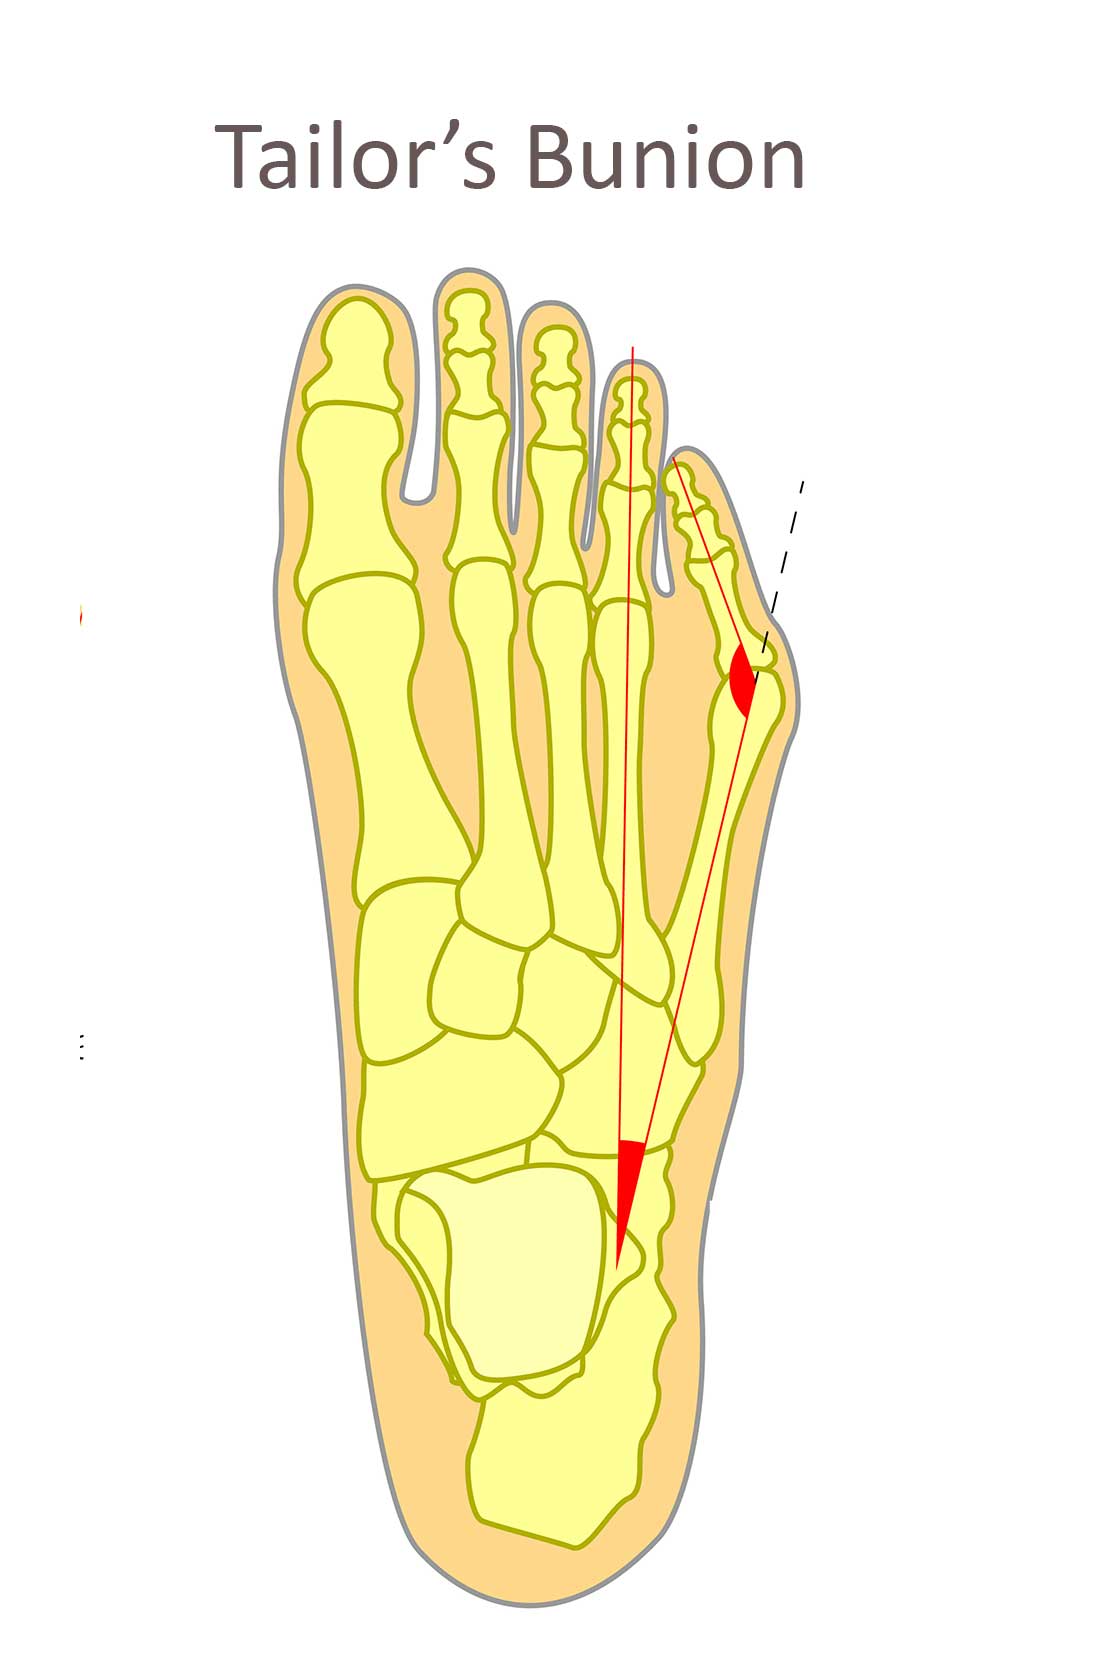 A tailors bunion causes the littlest toe to bend inward across the foot